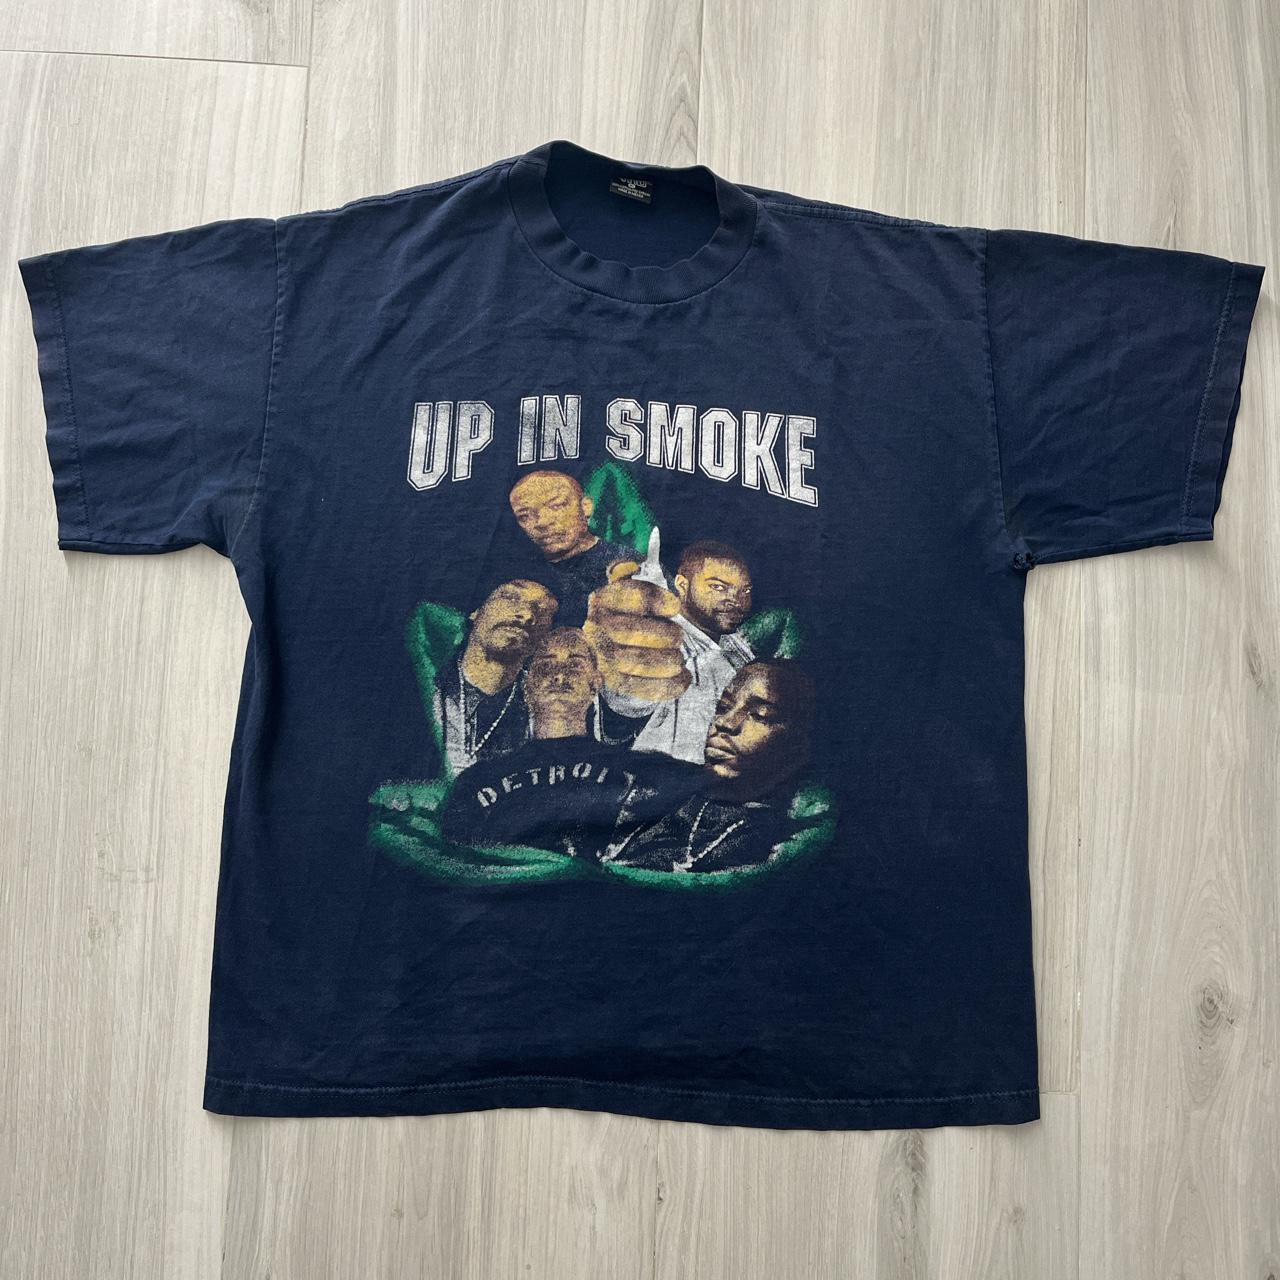 2000 Up in Smoke tour featuring Dr Dre, Snoop Dogg,... - Depop